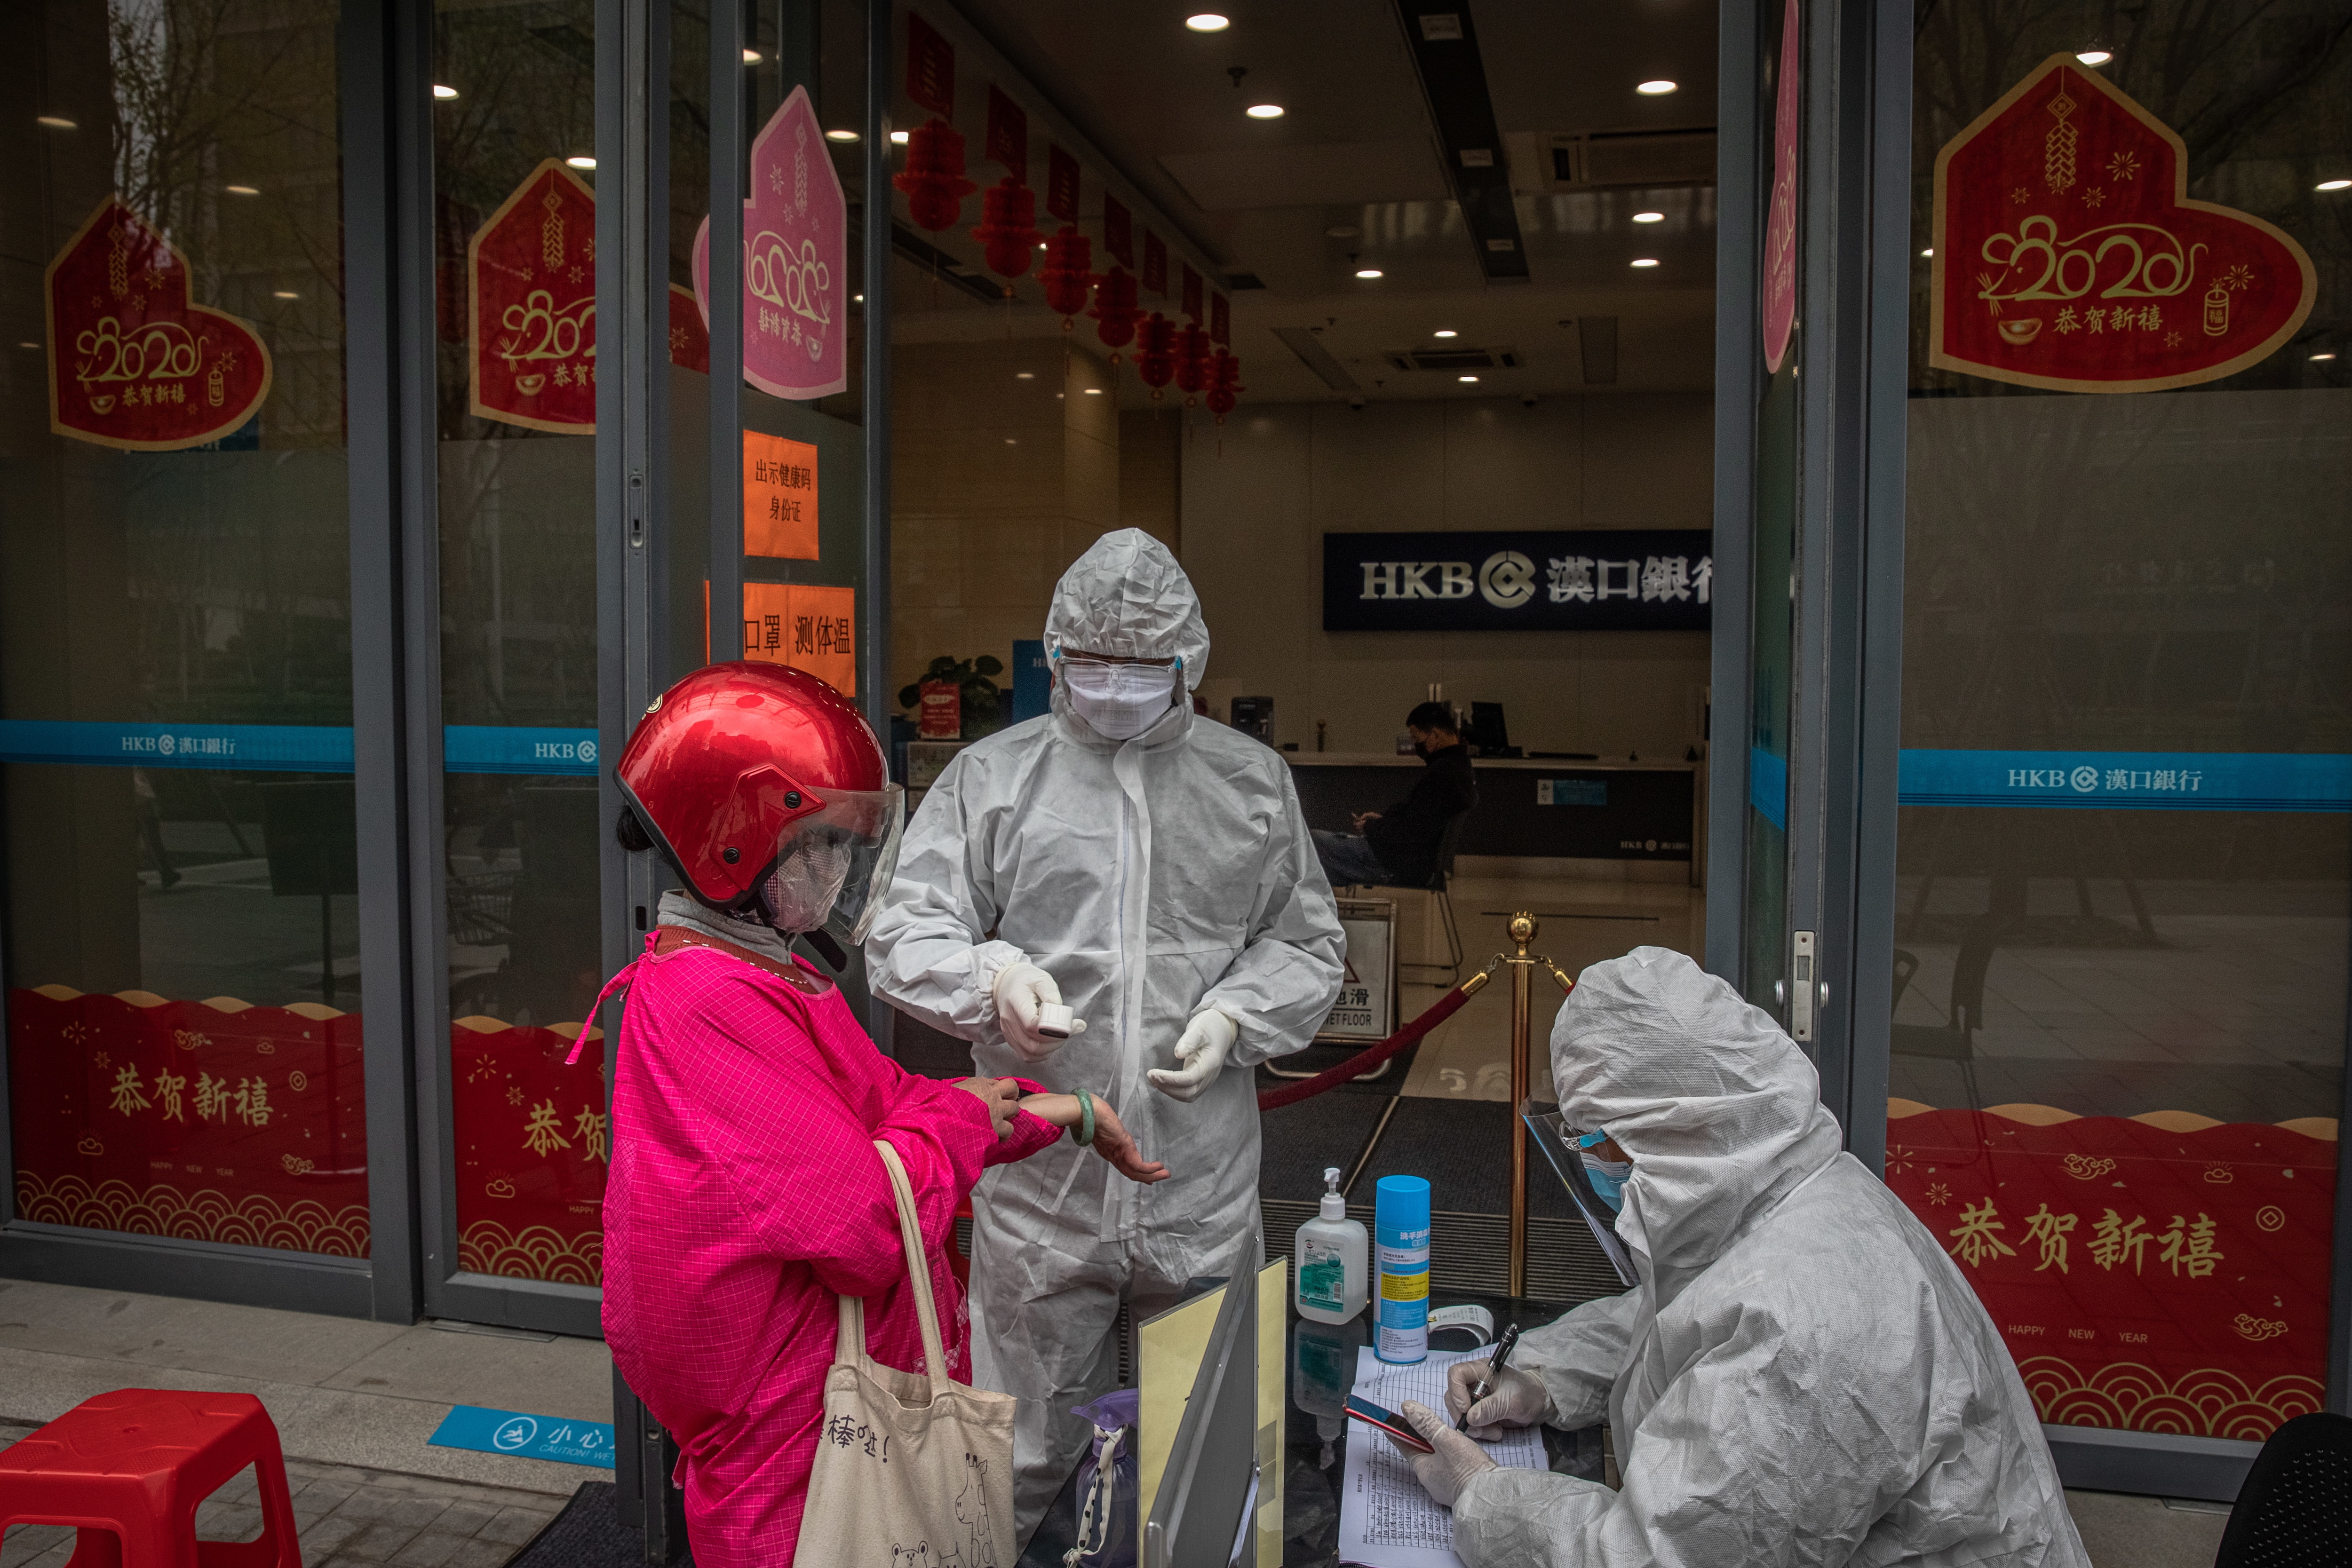 A worker in a protective outfit checks the body temperature of a woman at the entrance of a bank in Wuhan, China.